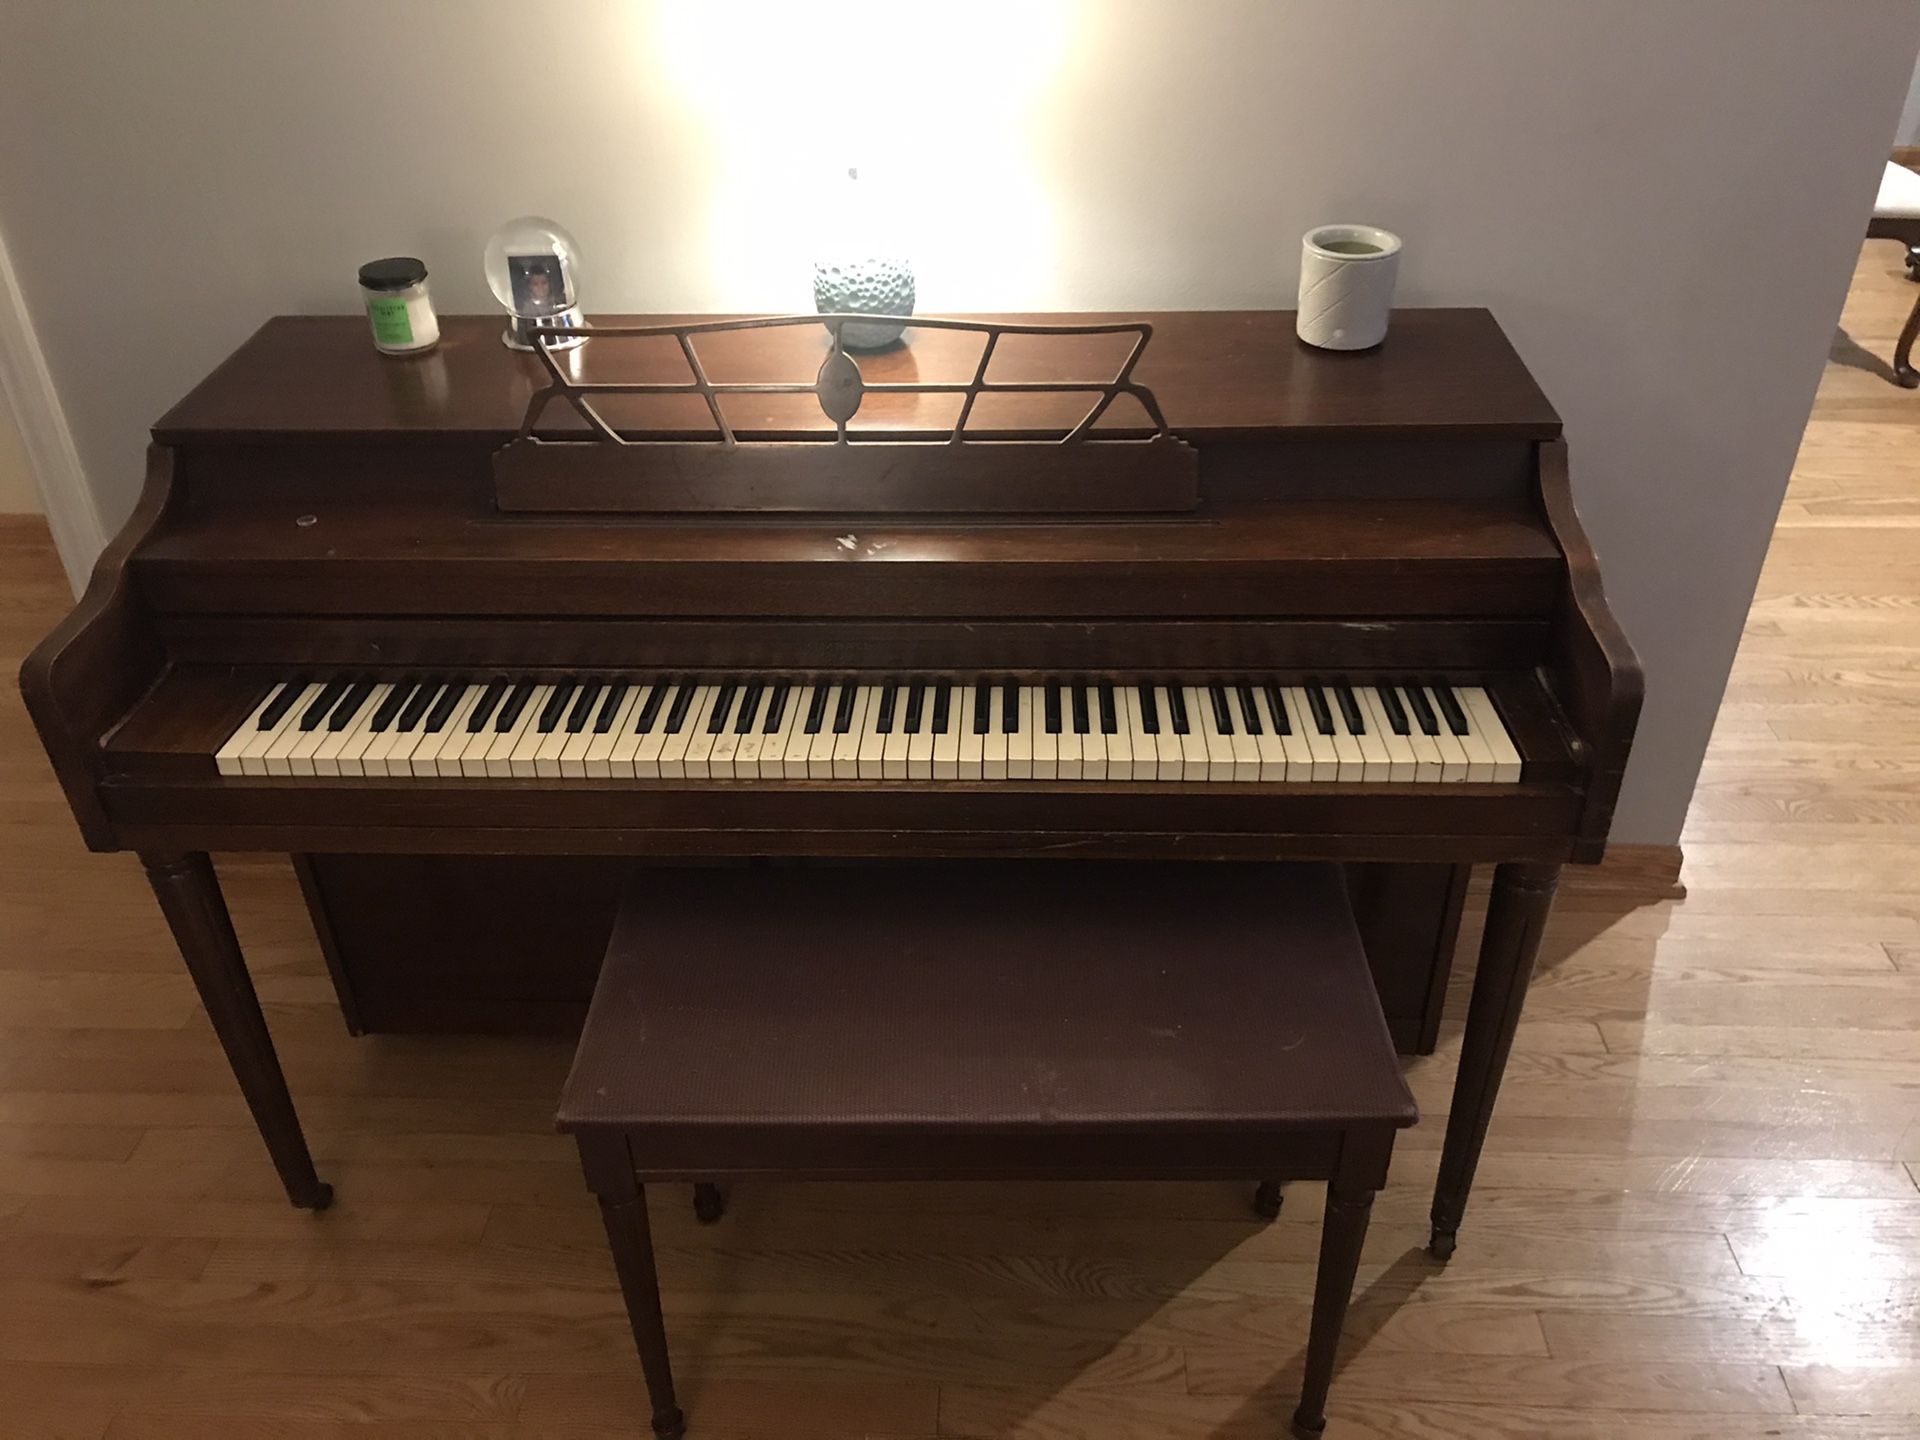 Piano with bench